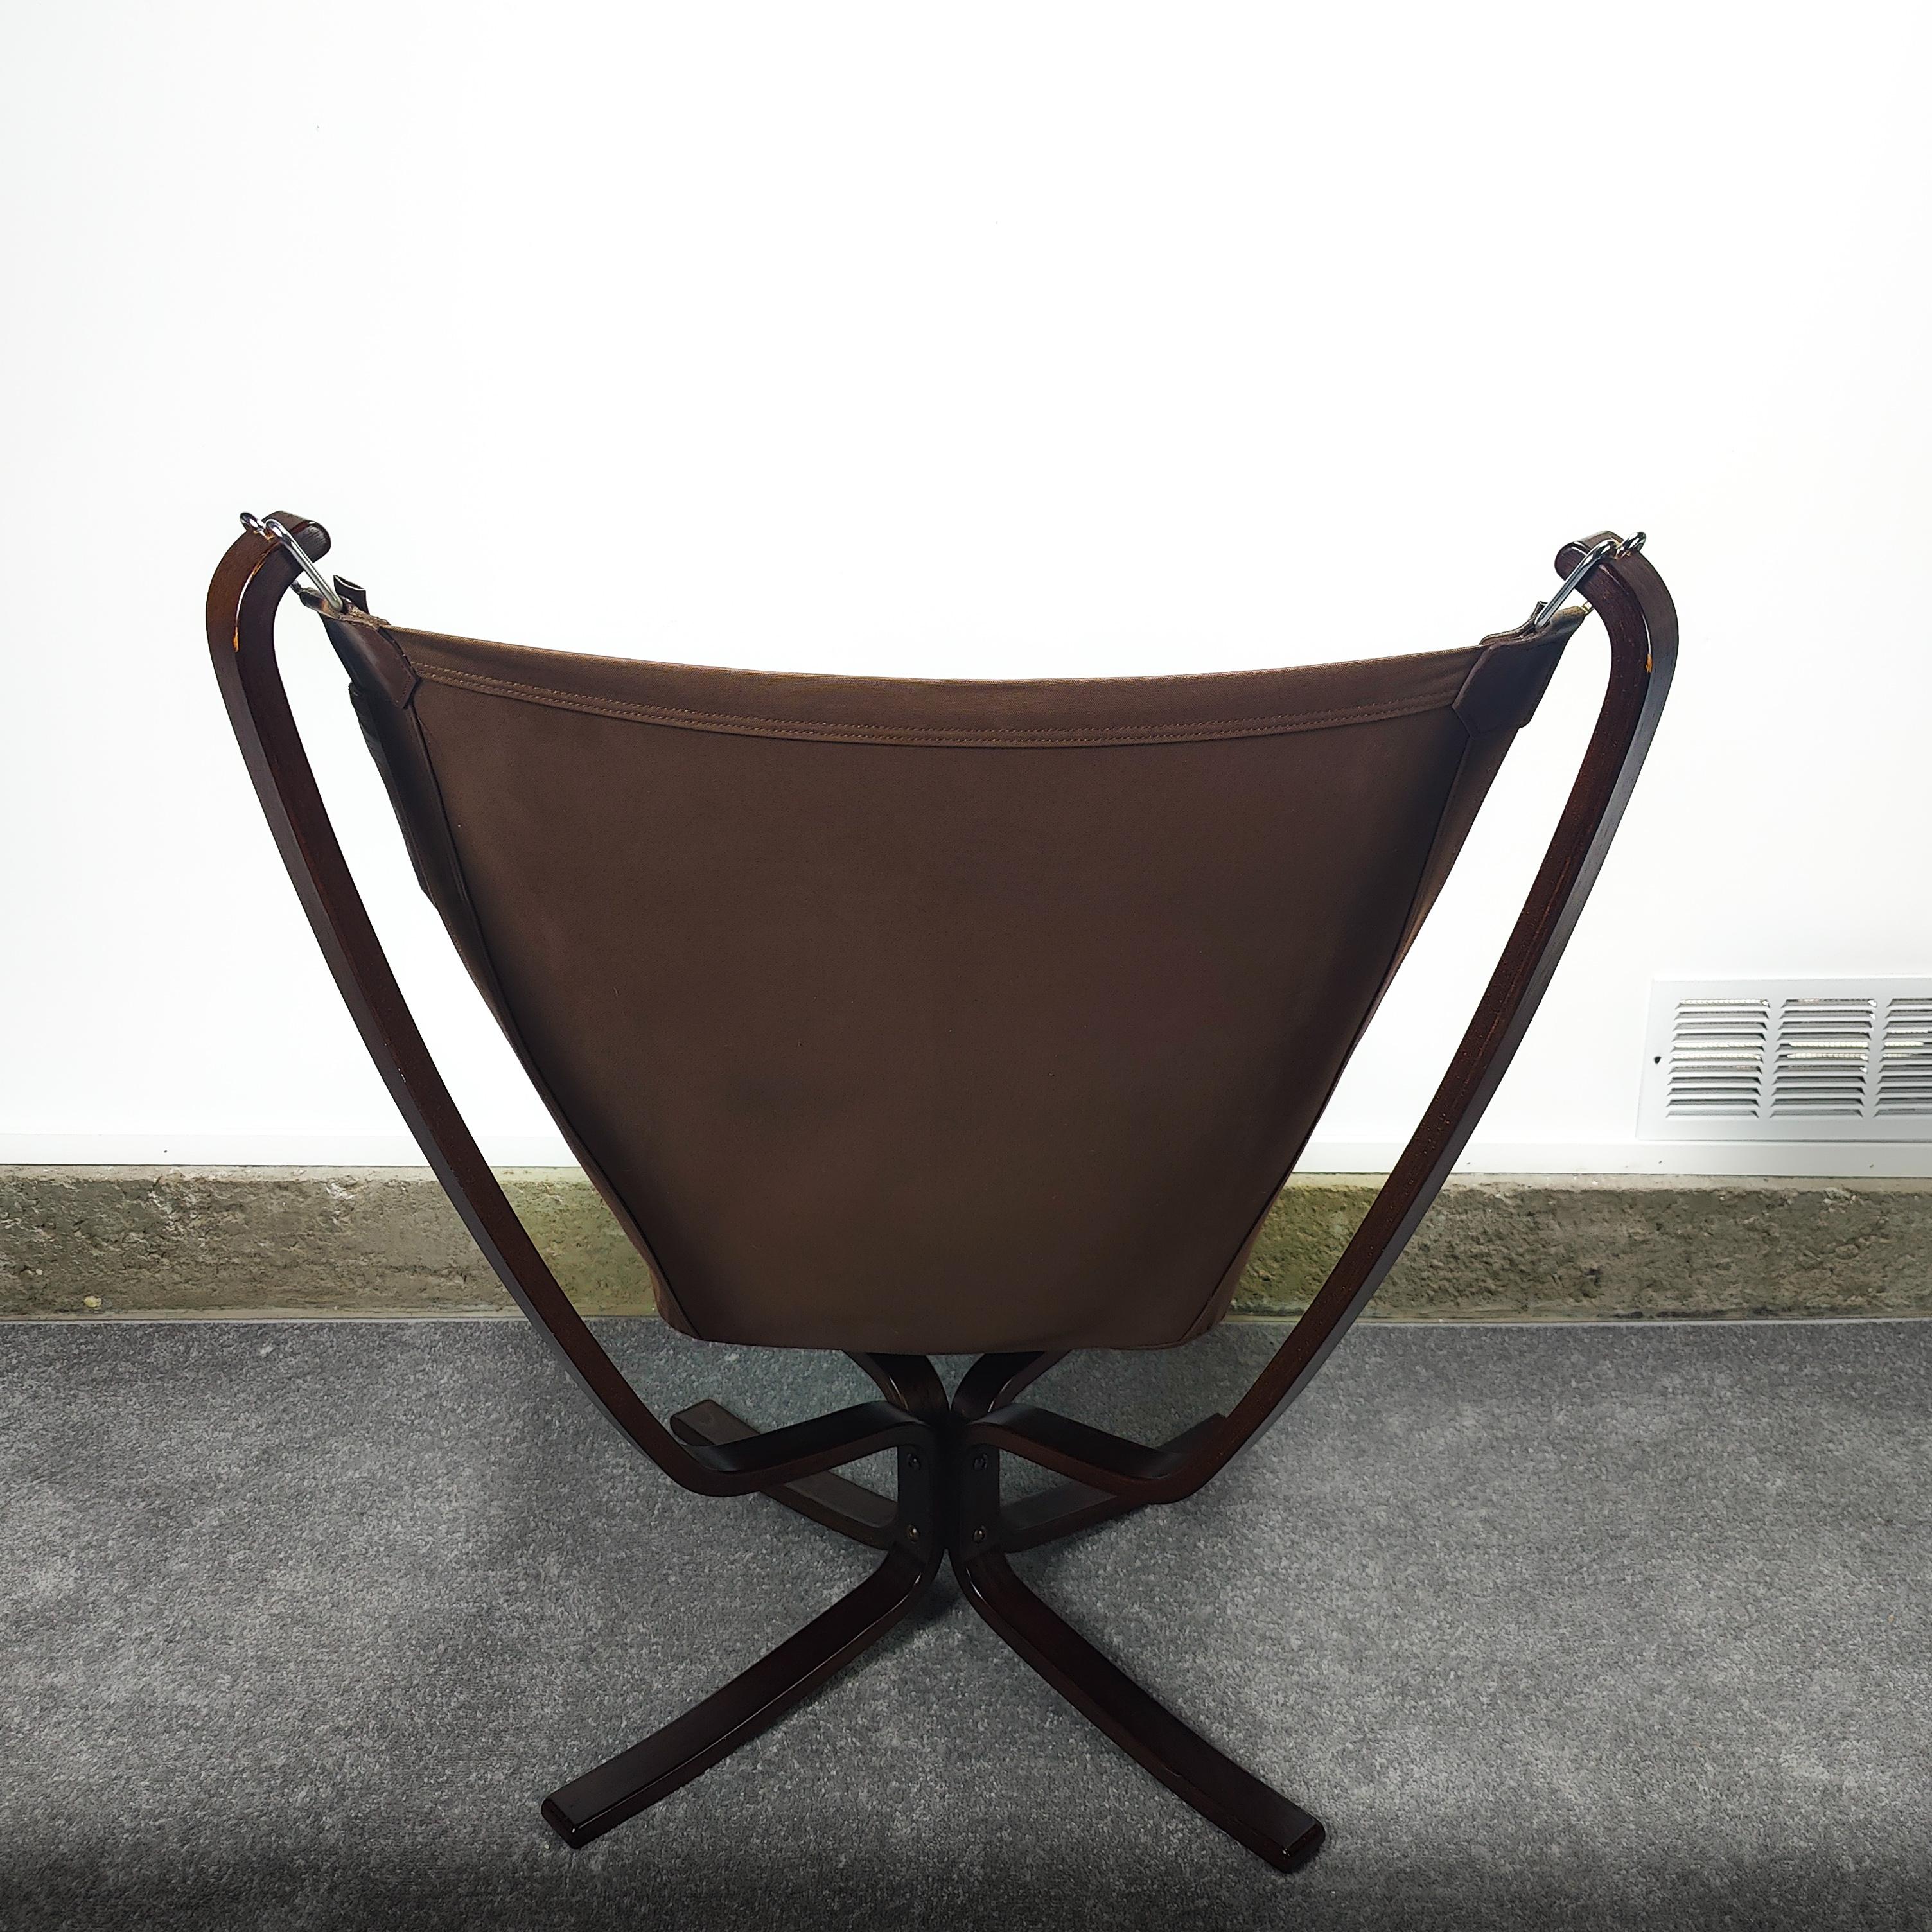 Norwegian Vintage Midcentury Falcon Chair by Sigurd Ressell for Vatne Mobler